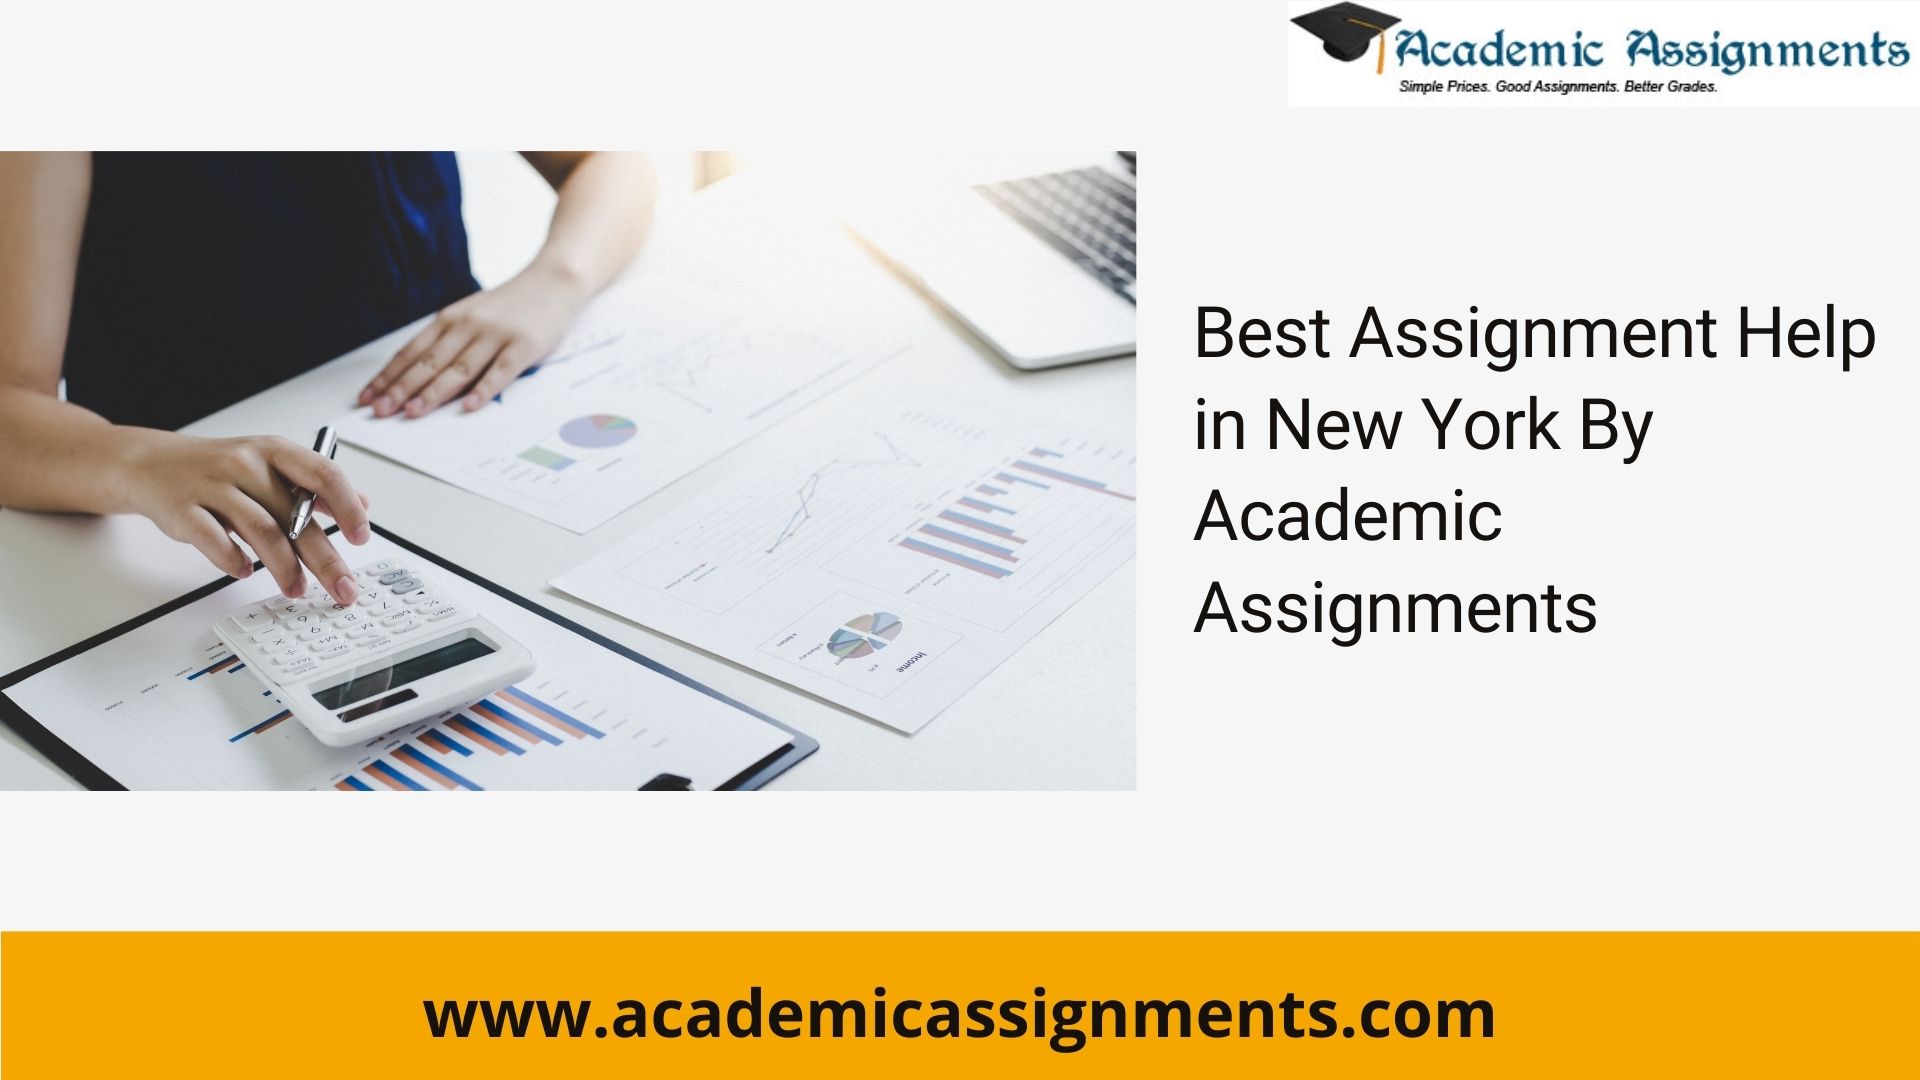 Best Assignment Help in New York By Academic Assignments